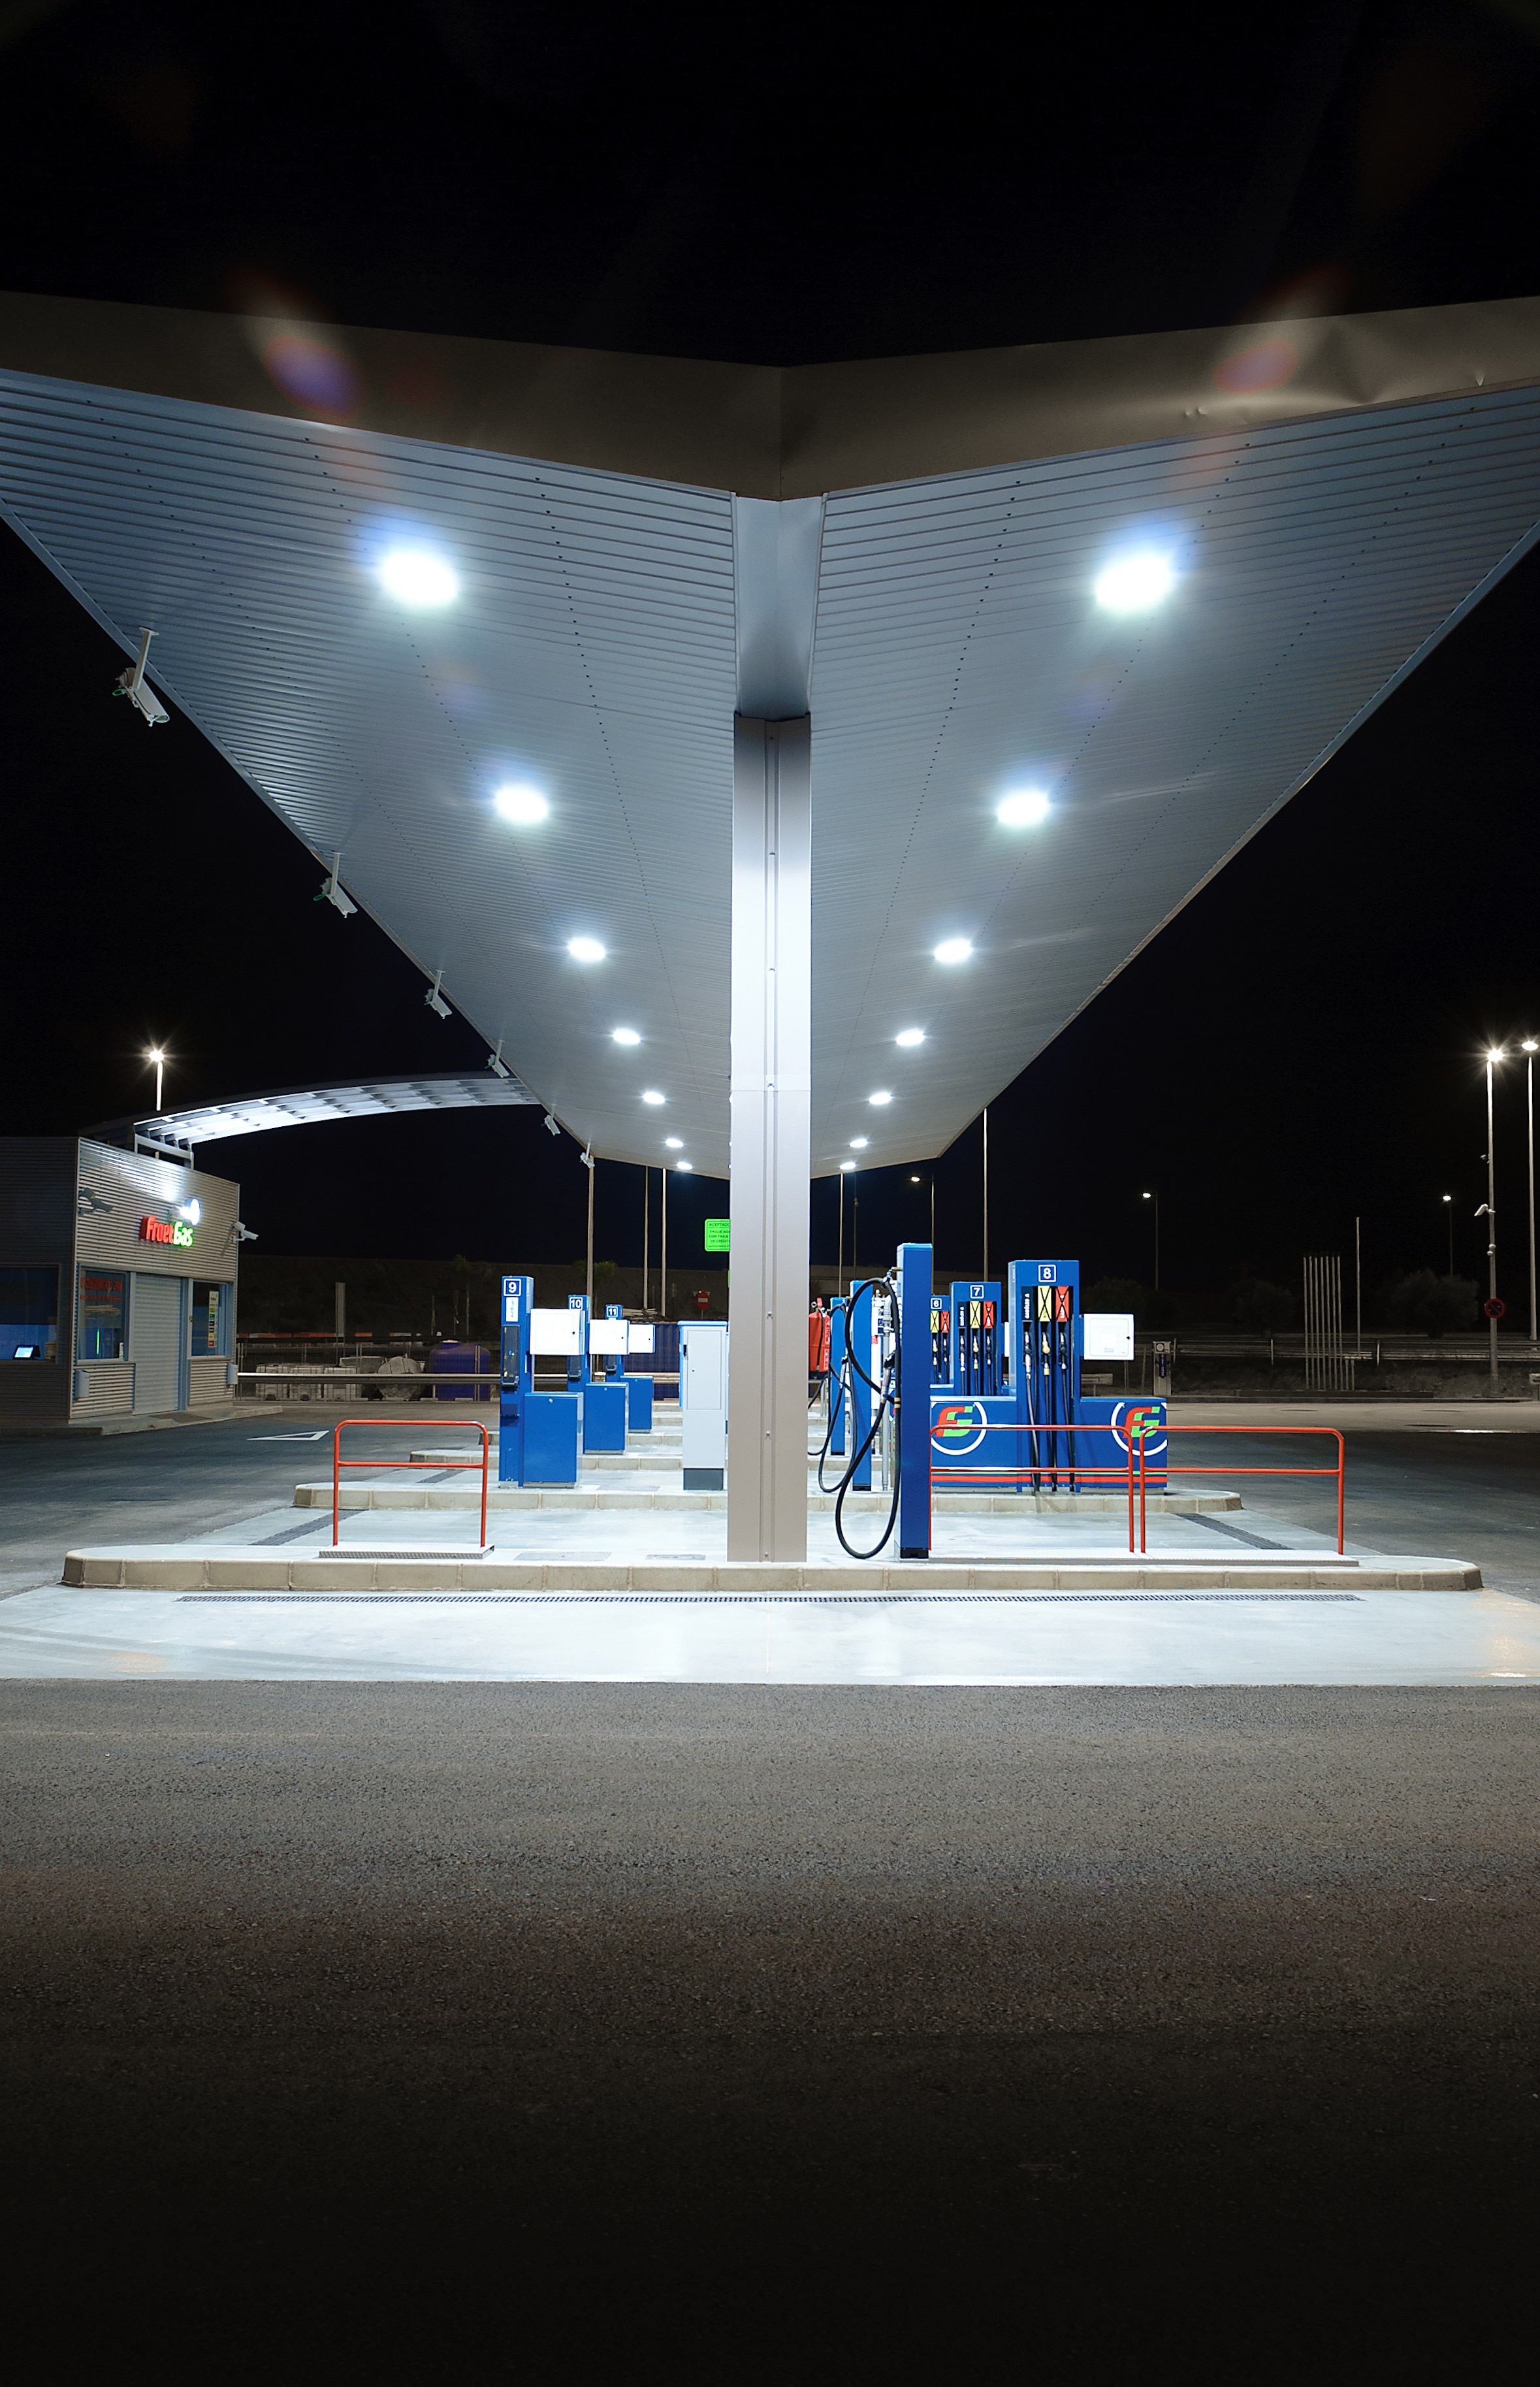 structural shot of gas station during night time